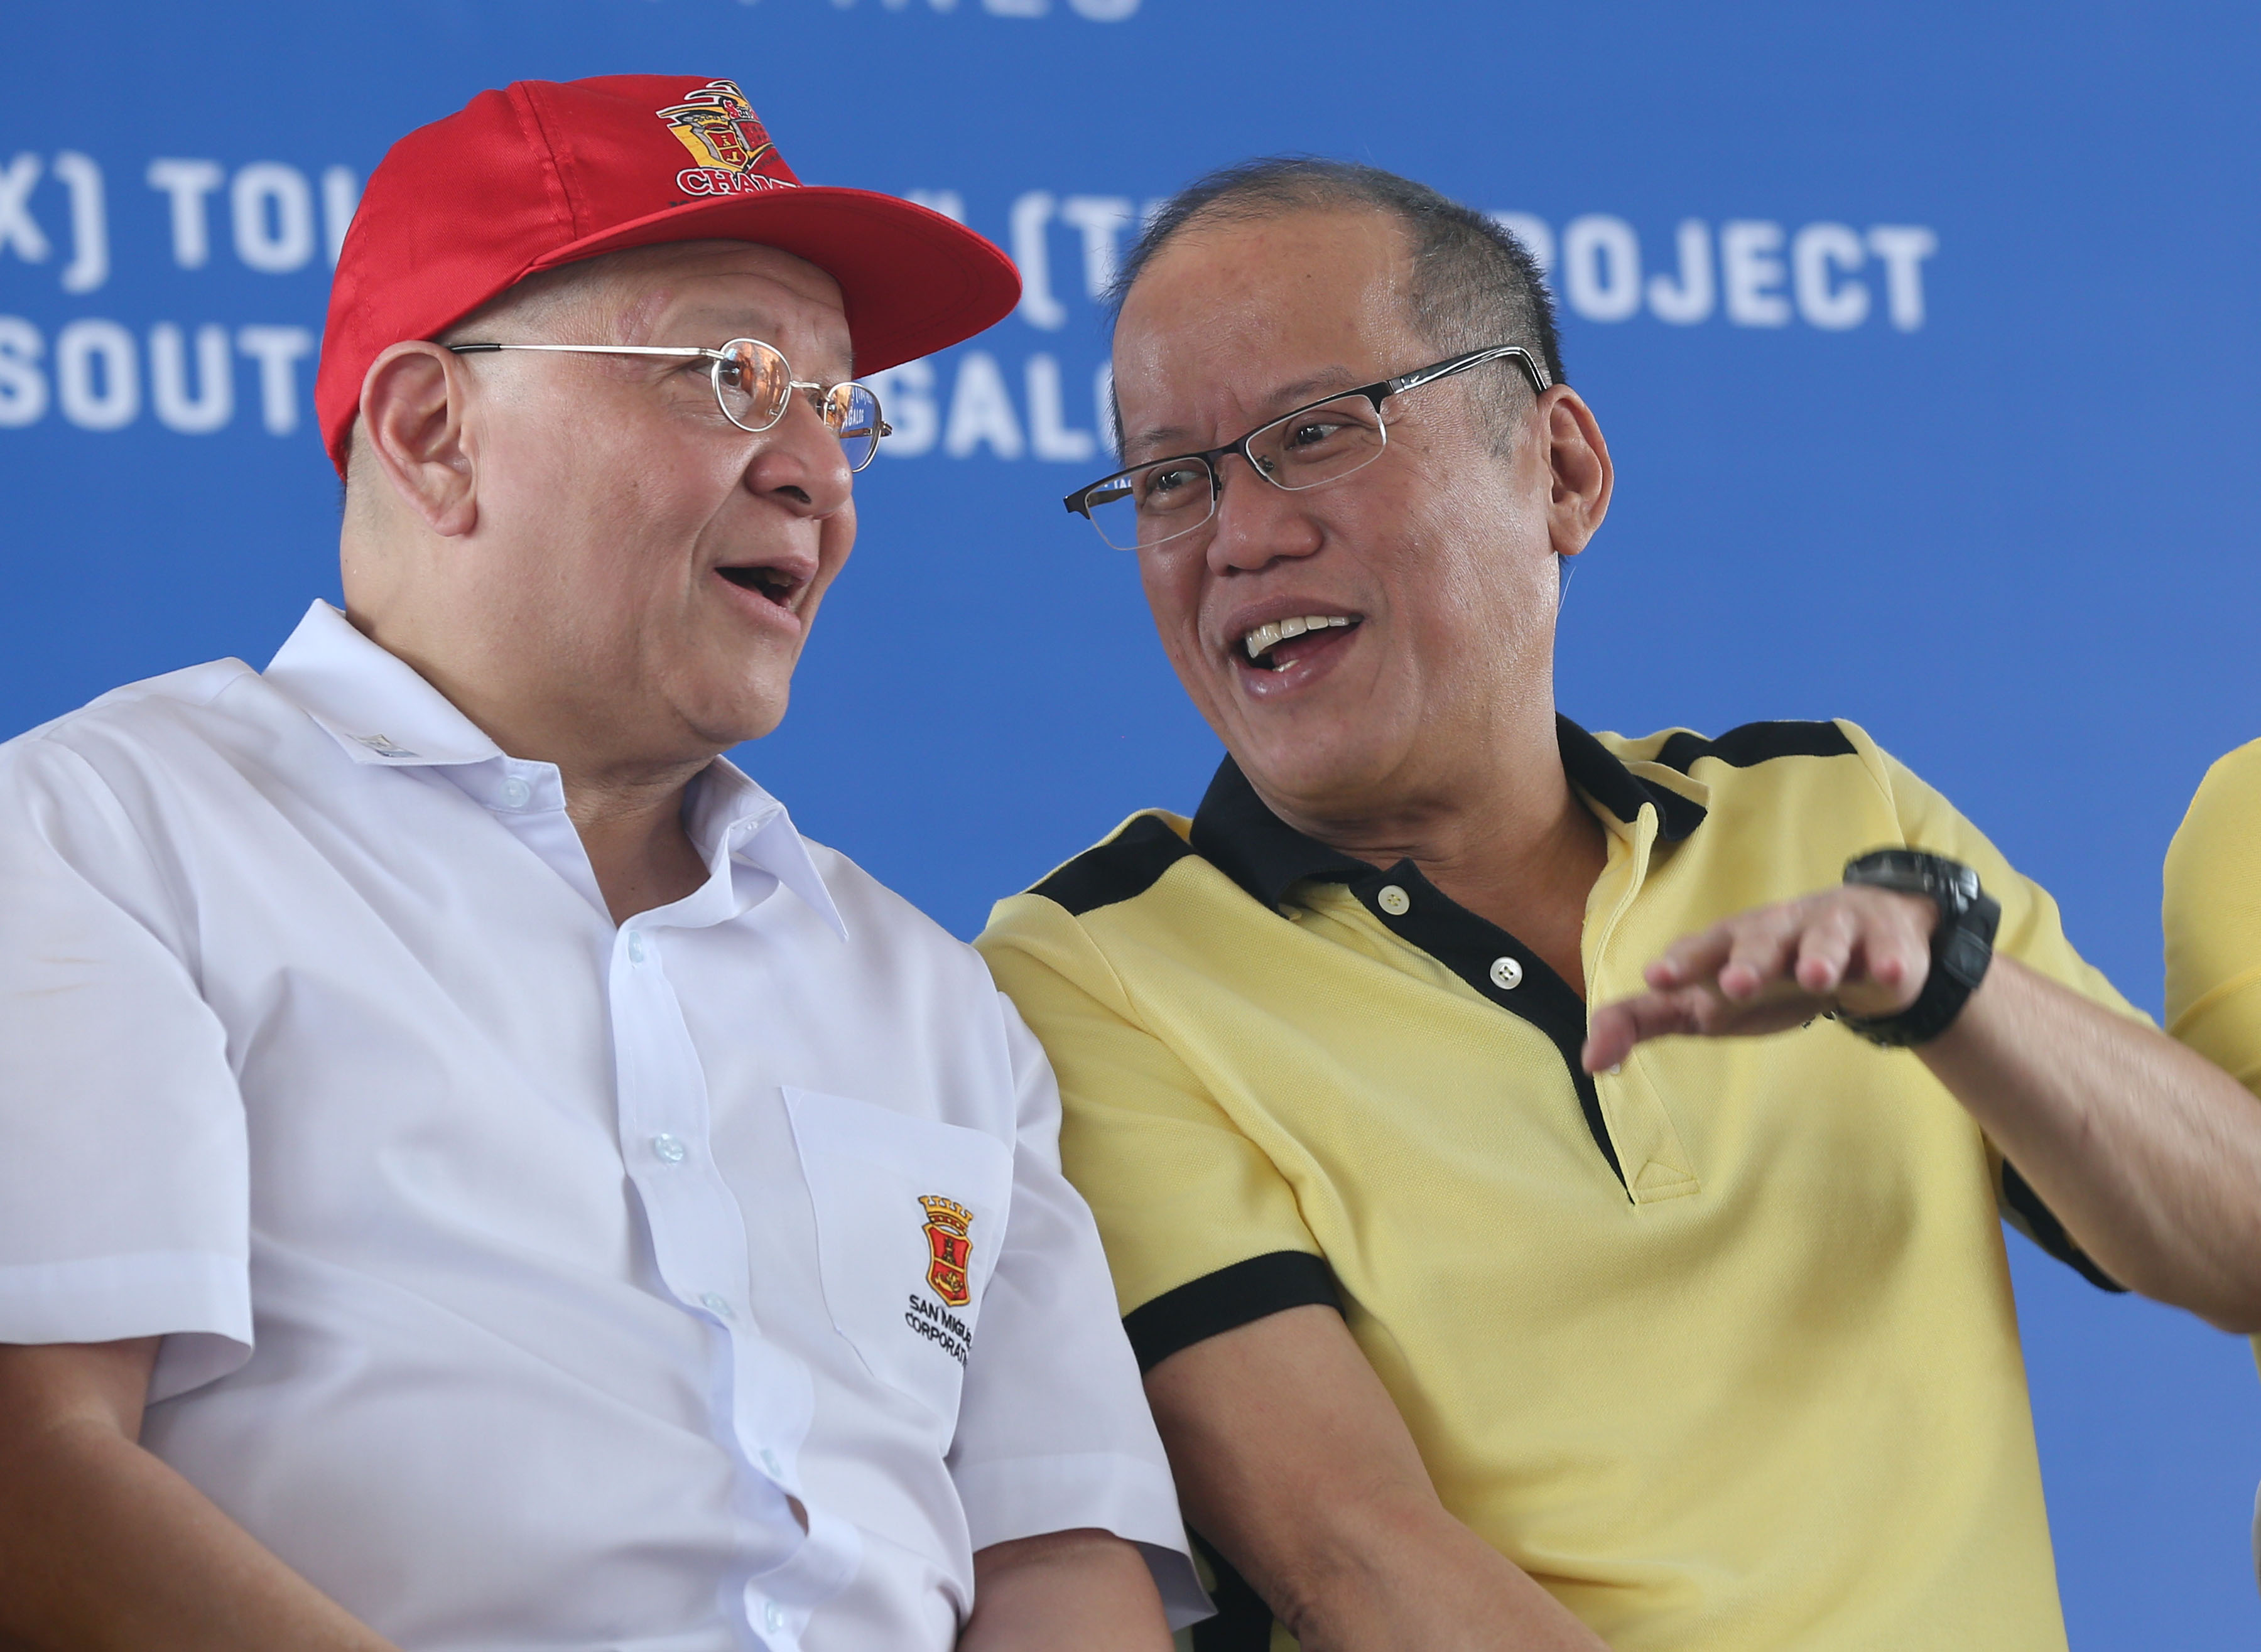 THE PRESIDENT AND THE IDOL. President Benigno S. Aquino III 
attends the SLEX-TR4 project briefing in Quezon province Monday, March 23. Here, Aquino chats with San Miguel Corporation President and COO Ramon S. Ang, whom he earlier called “idol” for fast tracking TPLEX, which was inaugurated in 2013 ahead of schedule. Photo by Ryan Lim / Malacañang Photo Bureau  